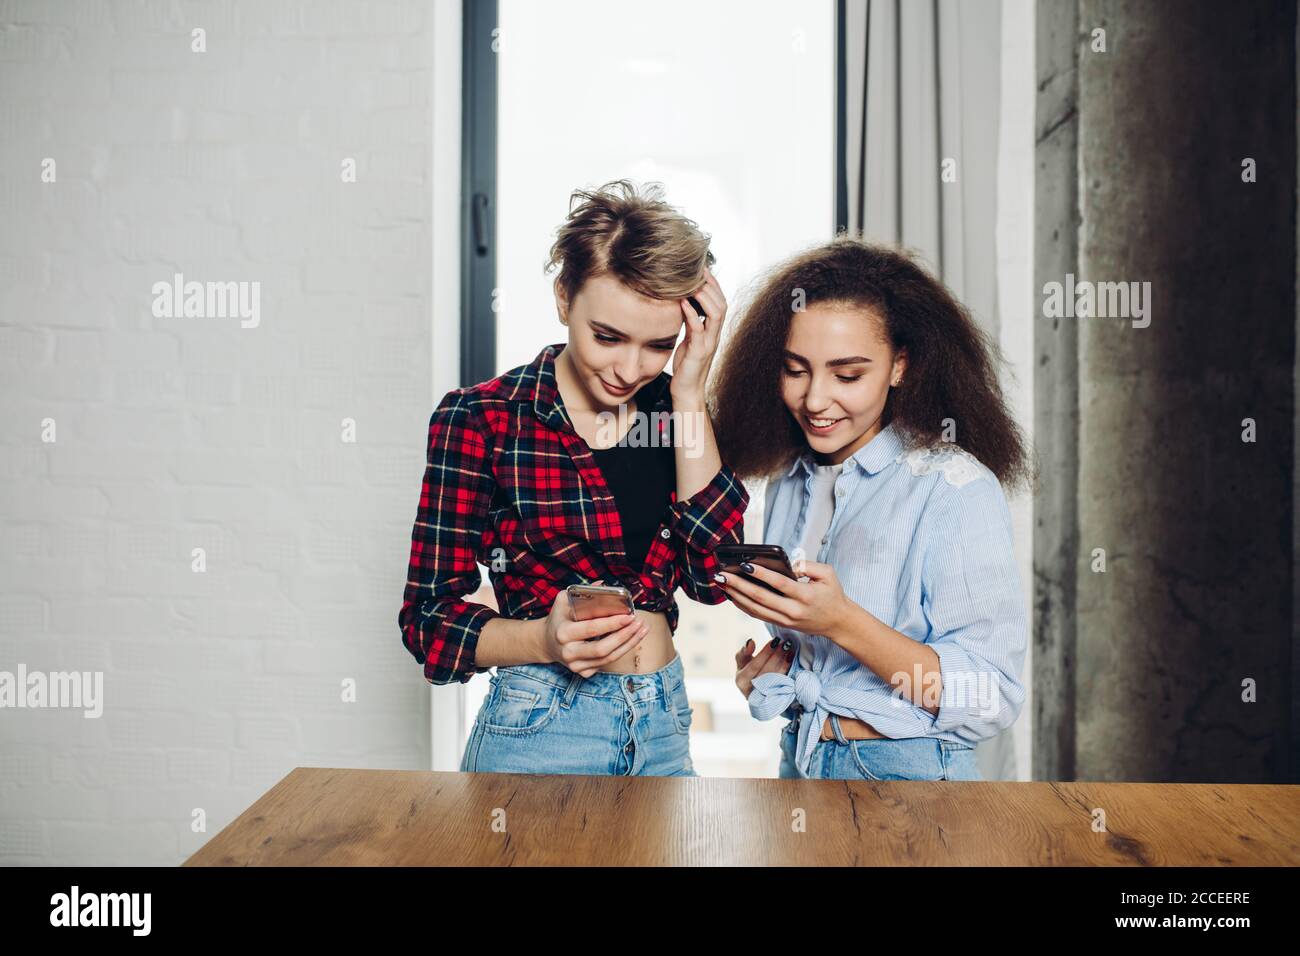 pleasant jouful women are holding smartphones and discussing something. close up photo. girl arev reading last news Stock Photo